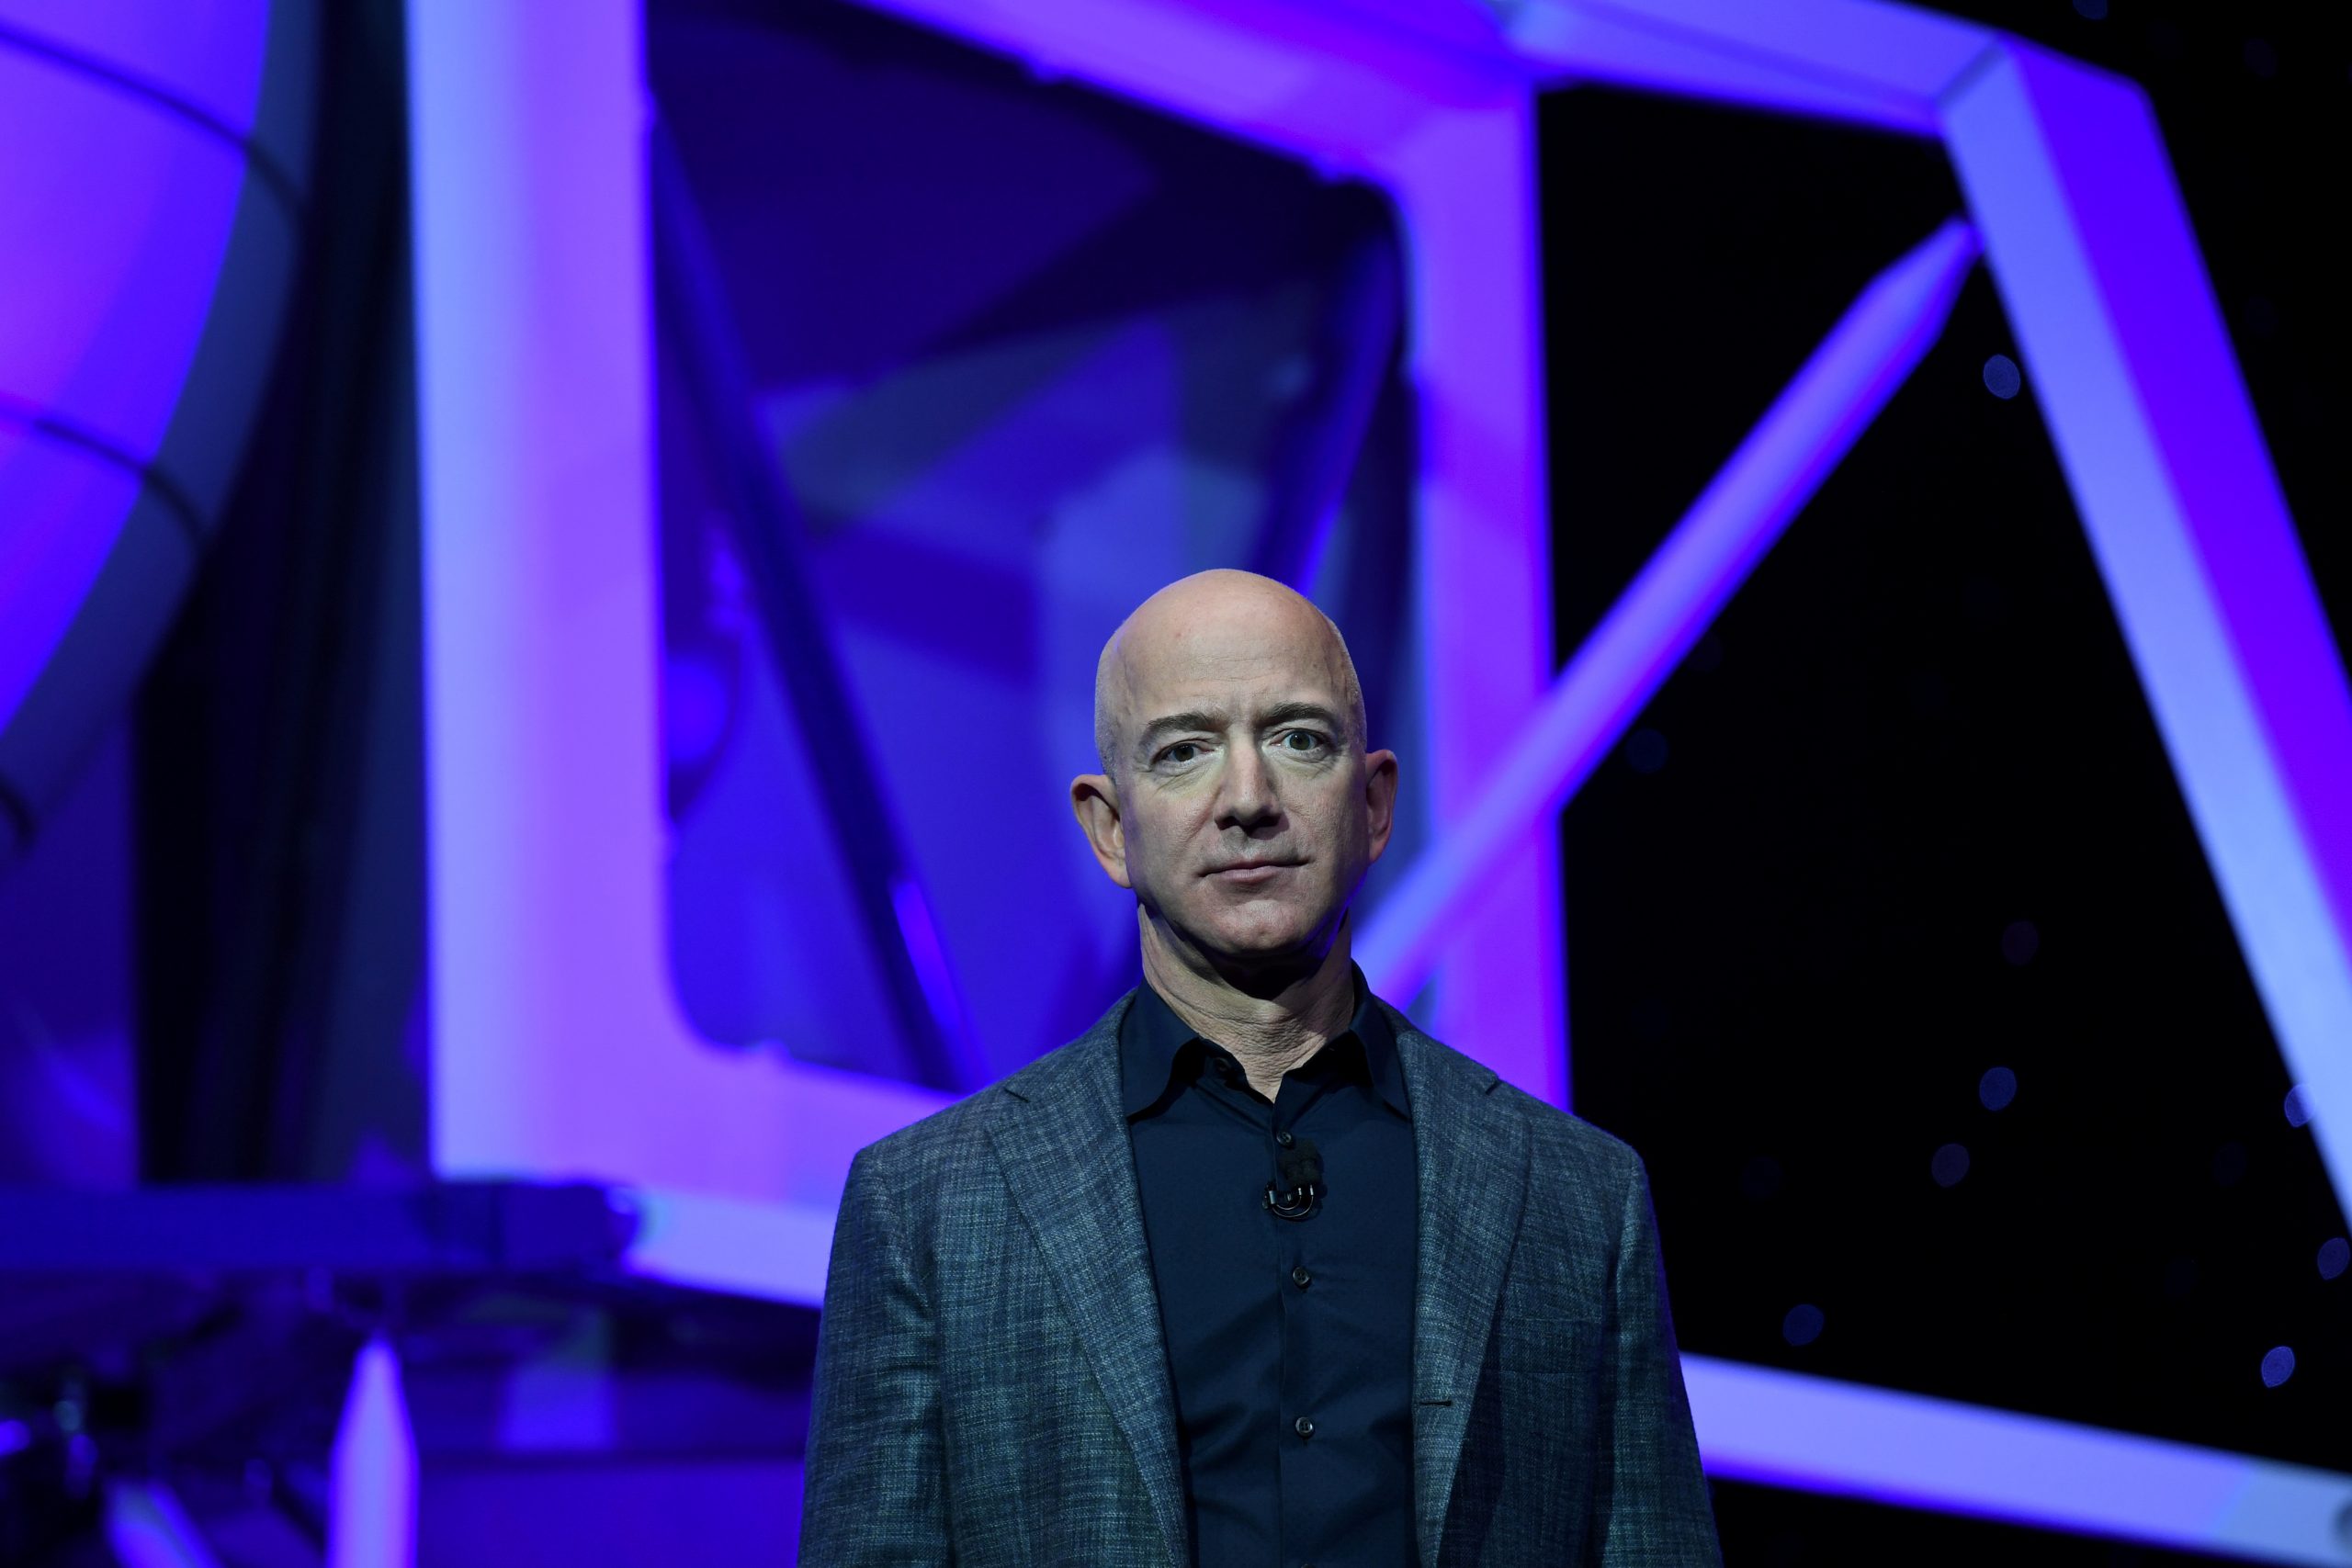  Amazon’s billionaire founder Jeff Bezos to fly to space next month